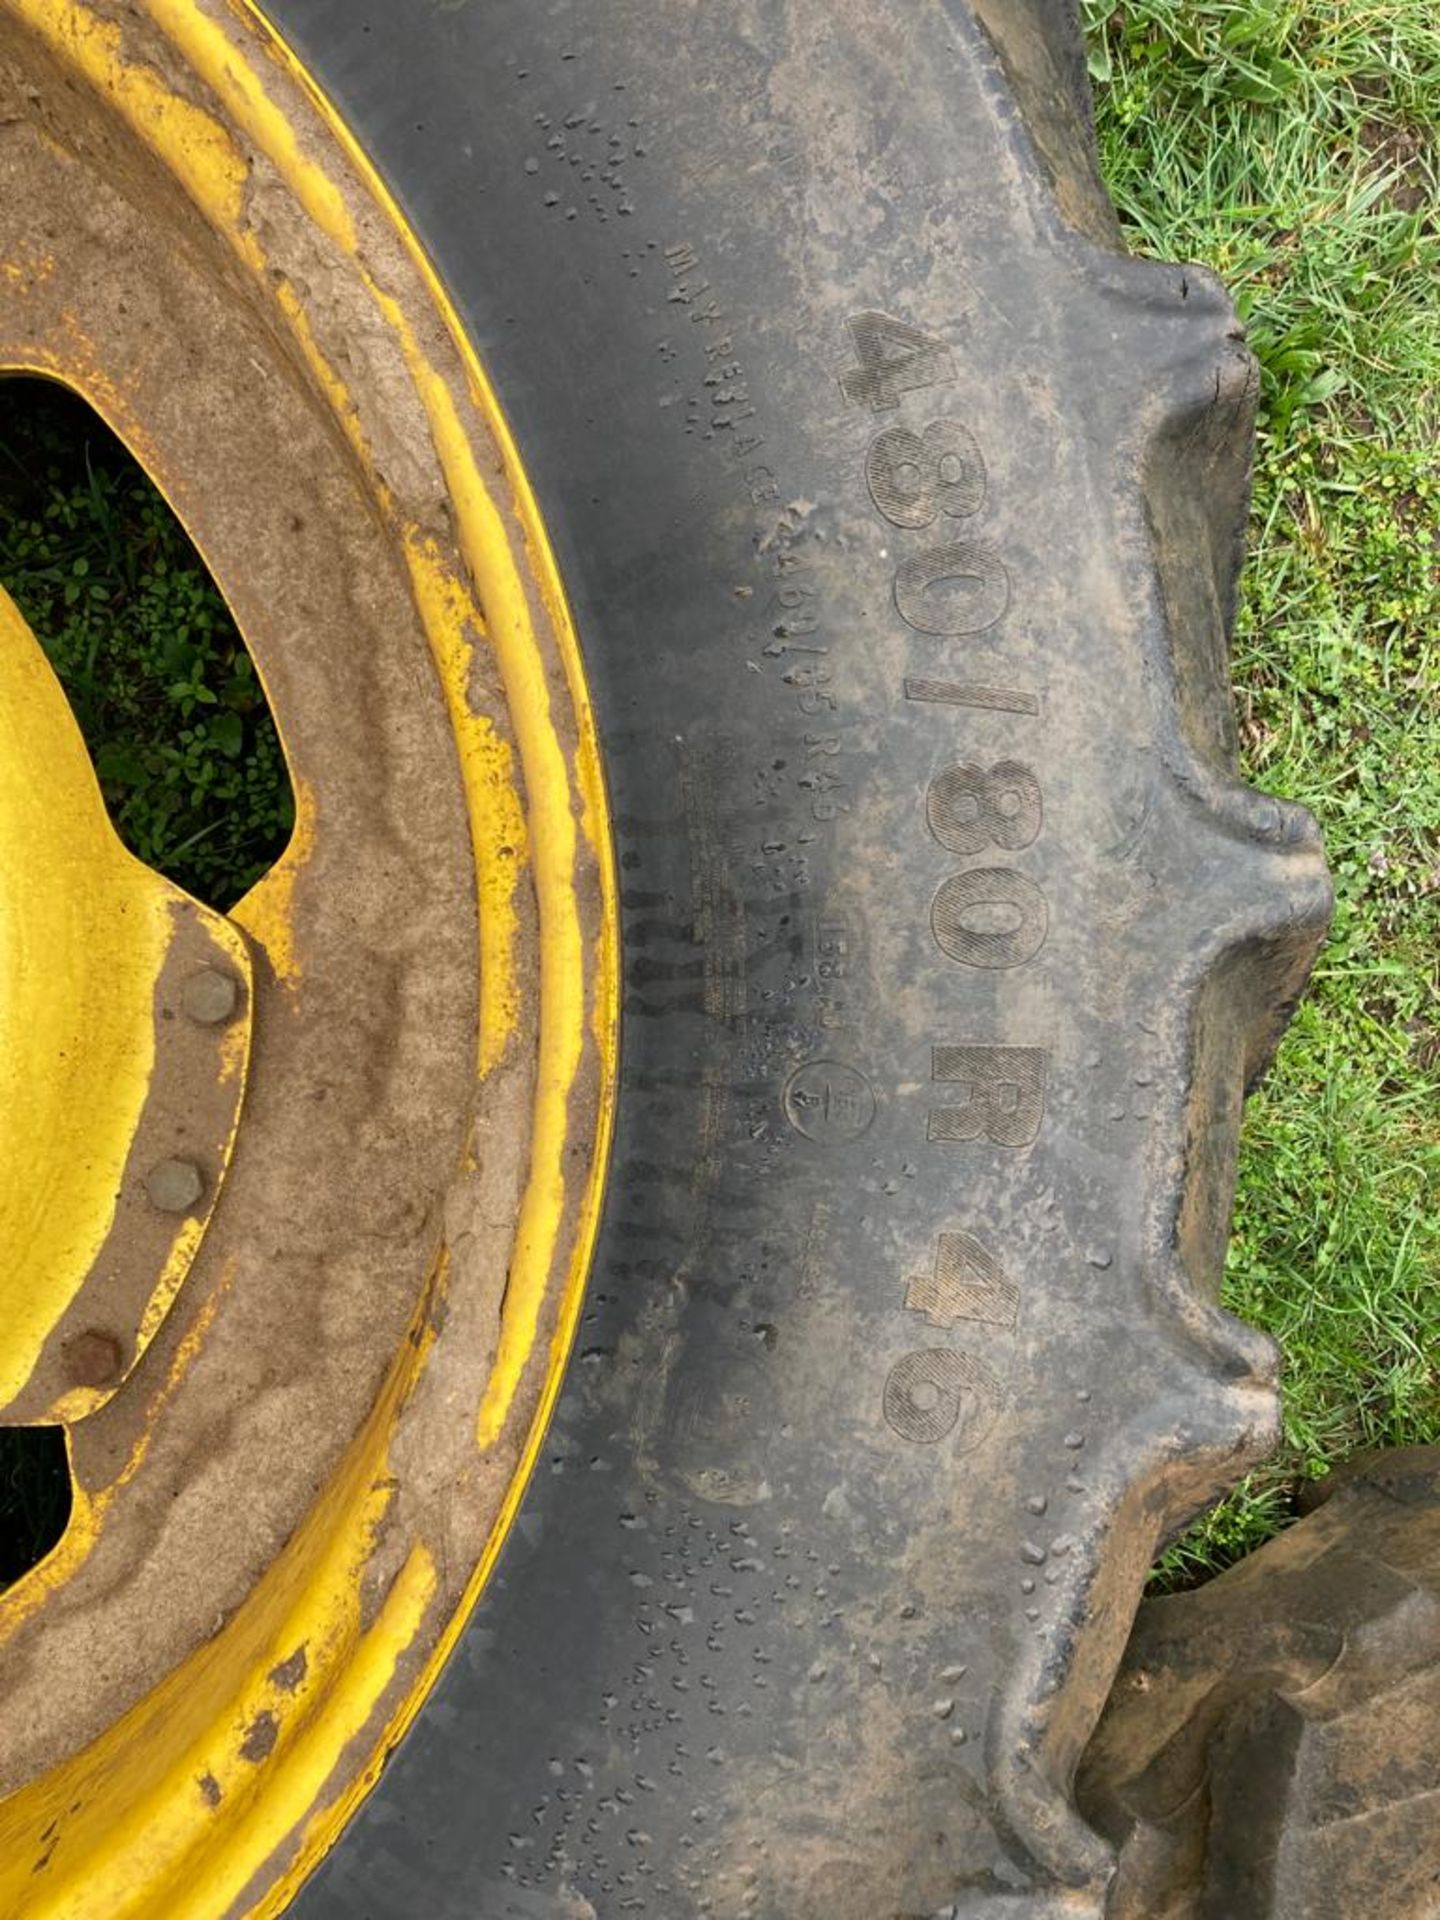 Tyres Rear 480/80/46 x 2 Front420/85/30 x 2, for 7530, Condition very little tread. - Image 3 of 7